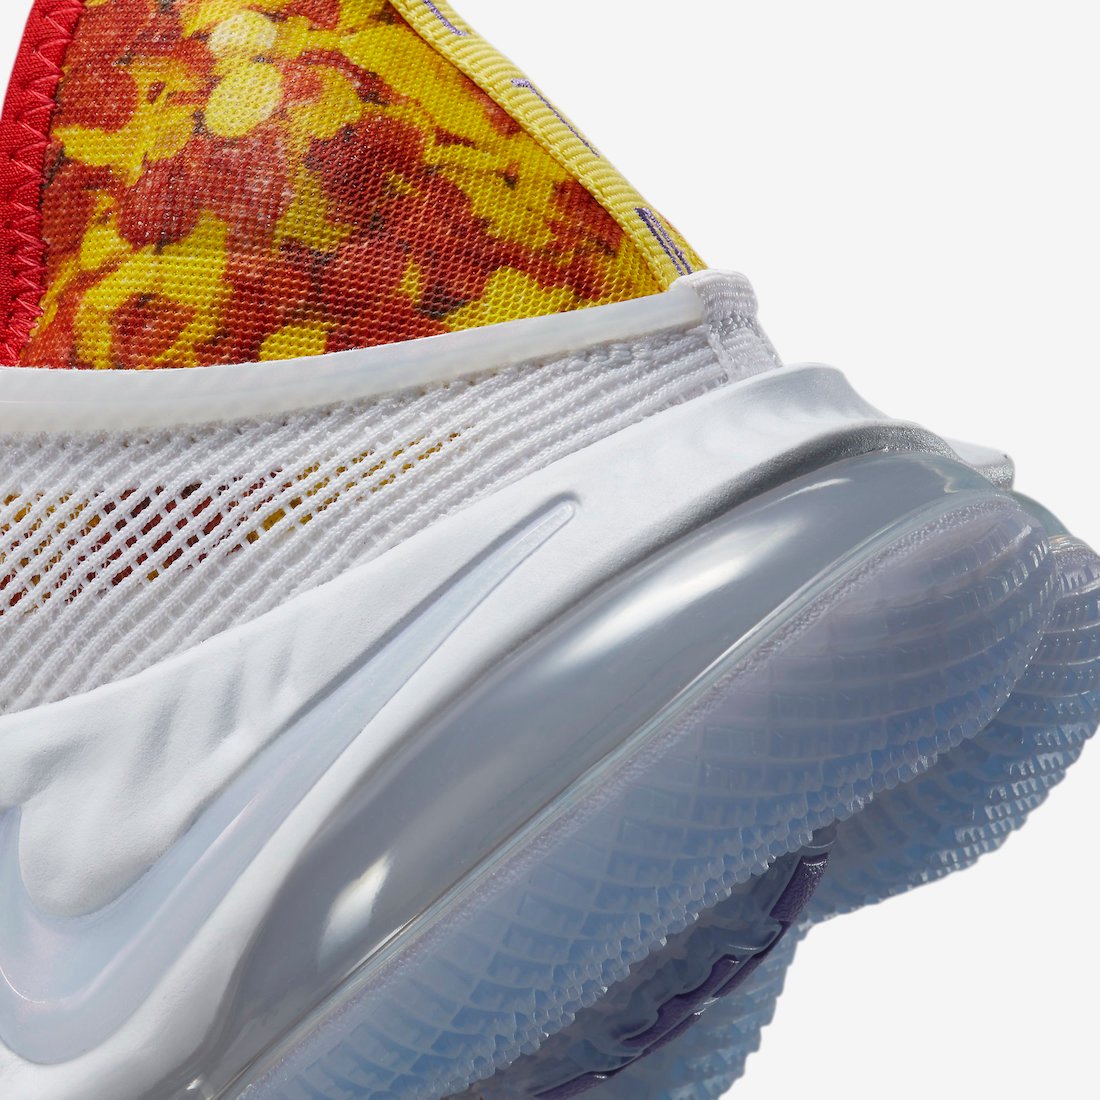 Nike LeBron 19 Low Magic Fruity Pebbles DQ8344-100 Release Date